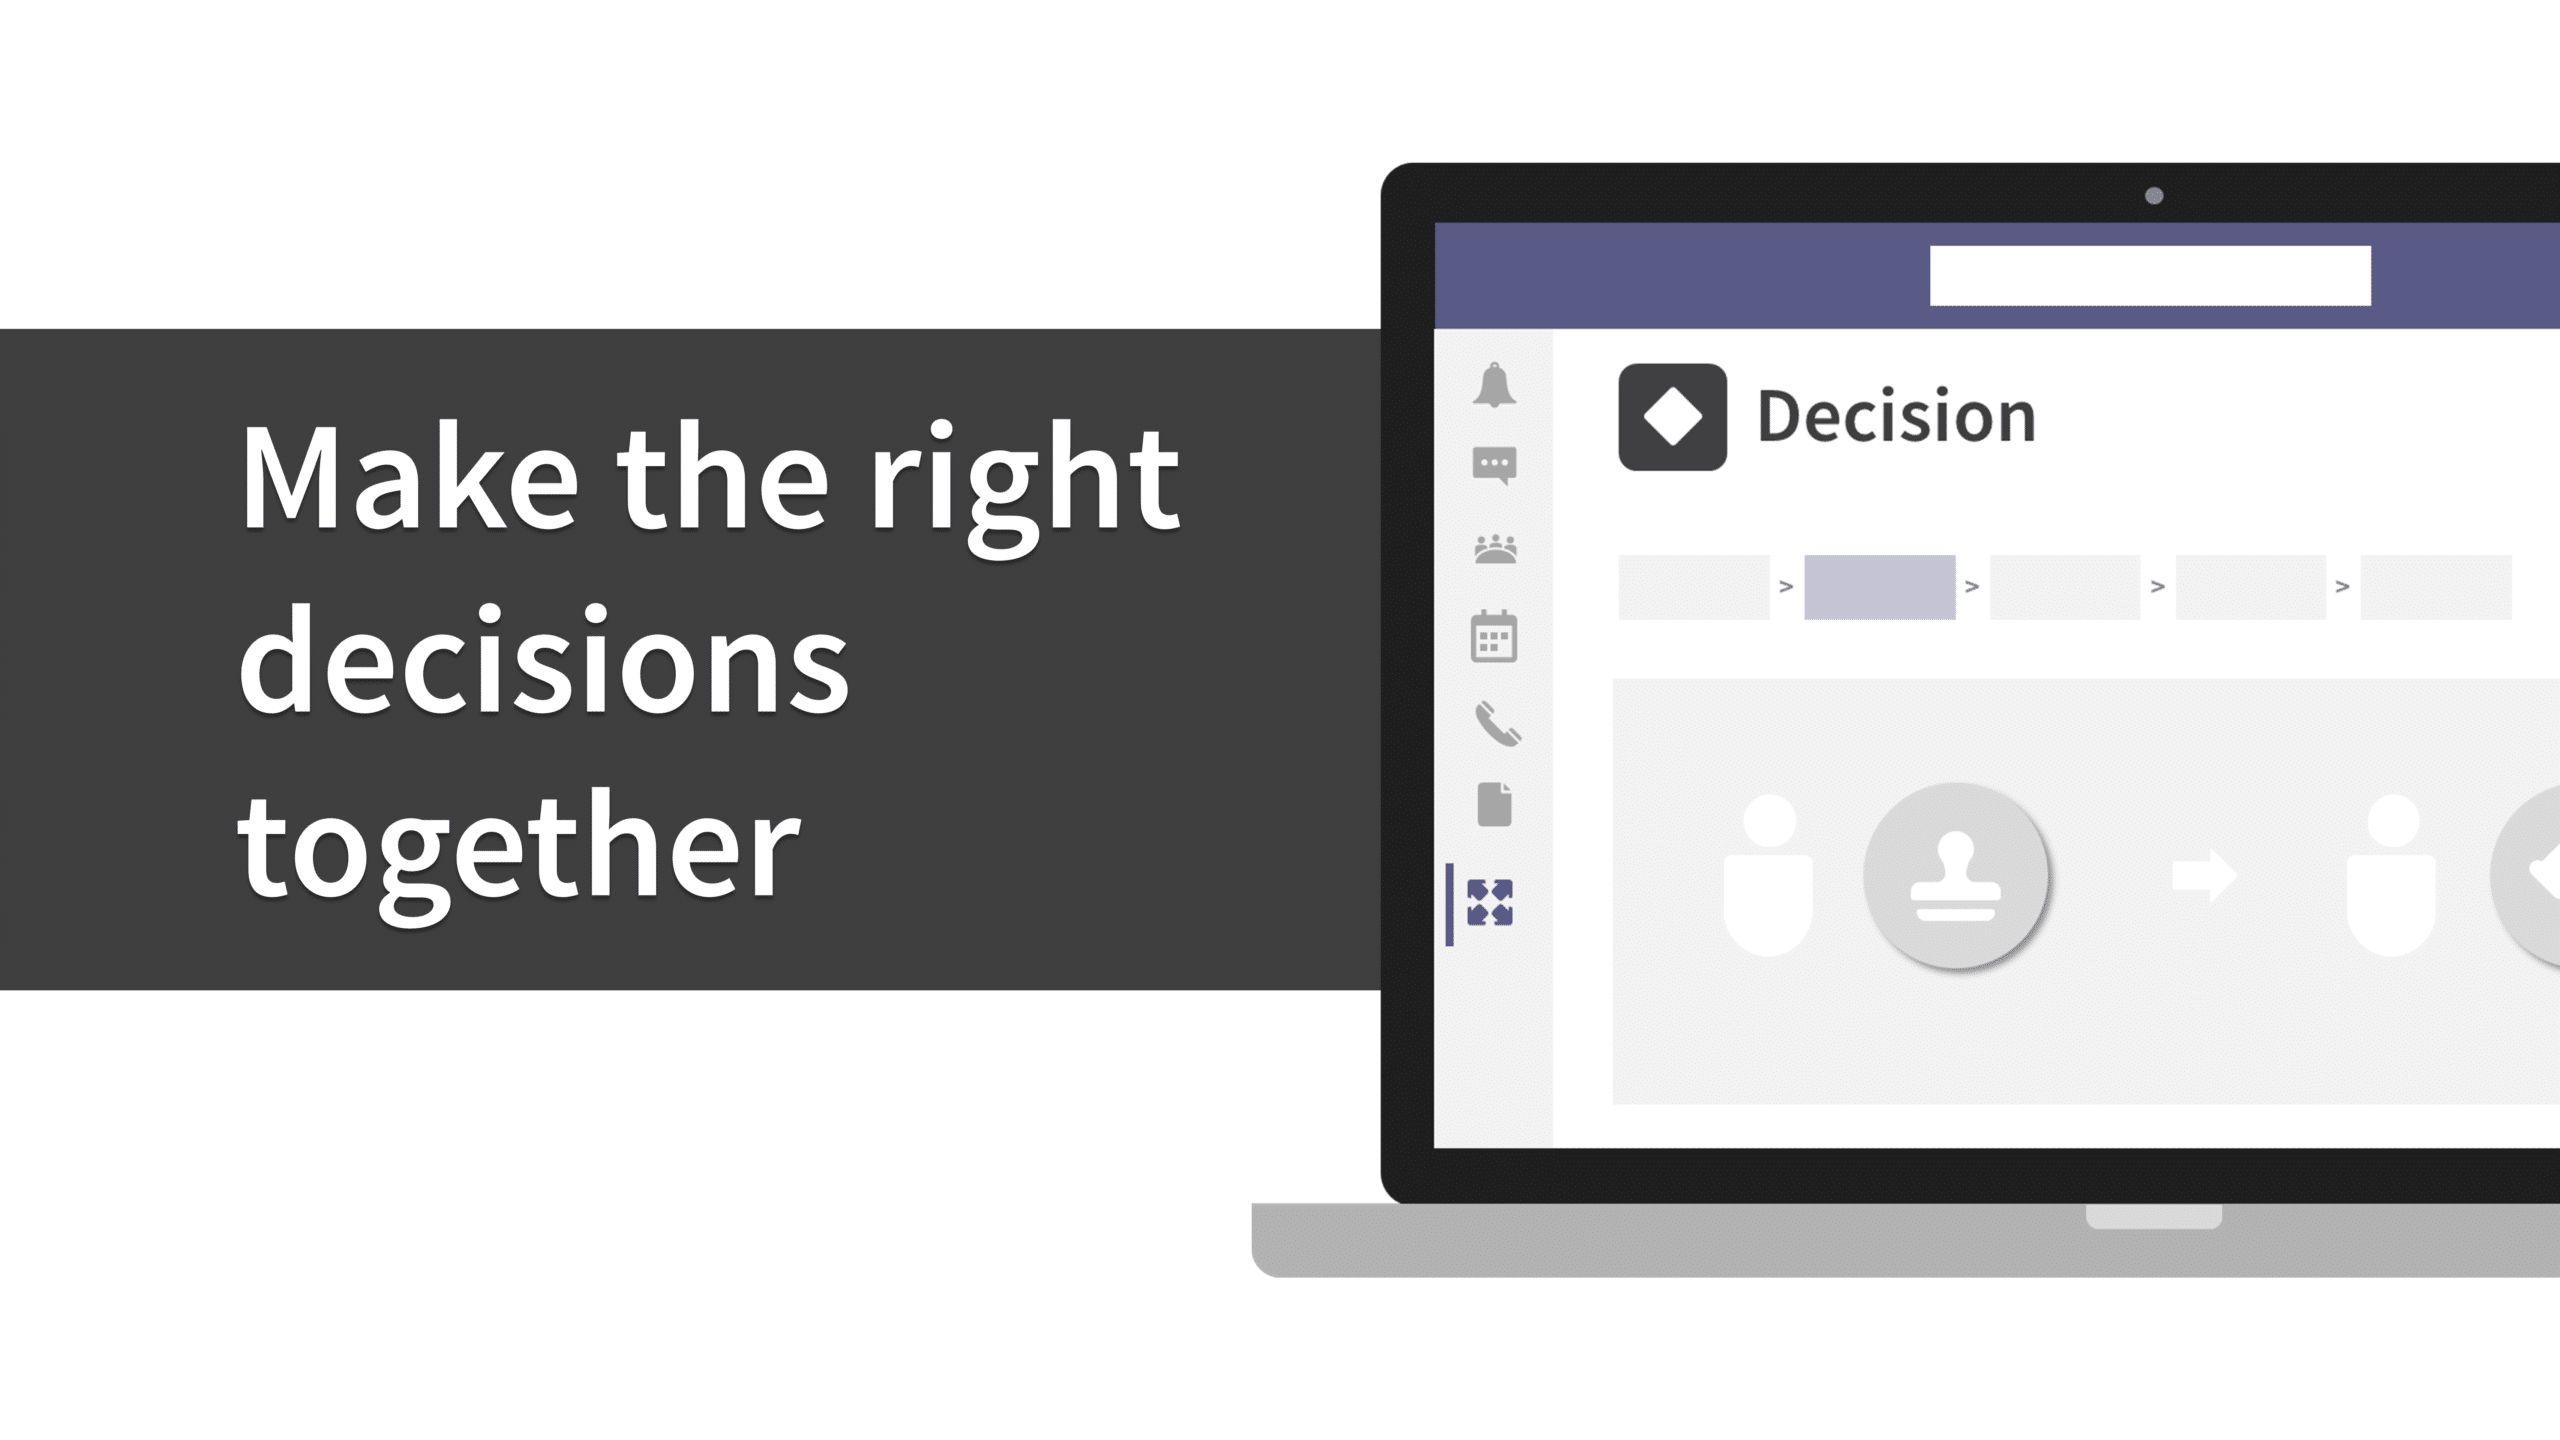 Make the right decisions together